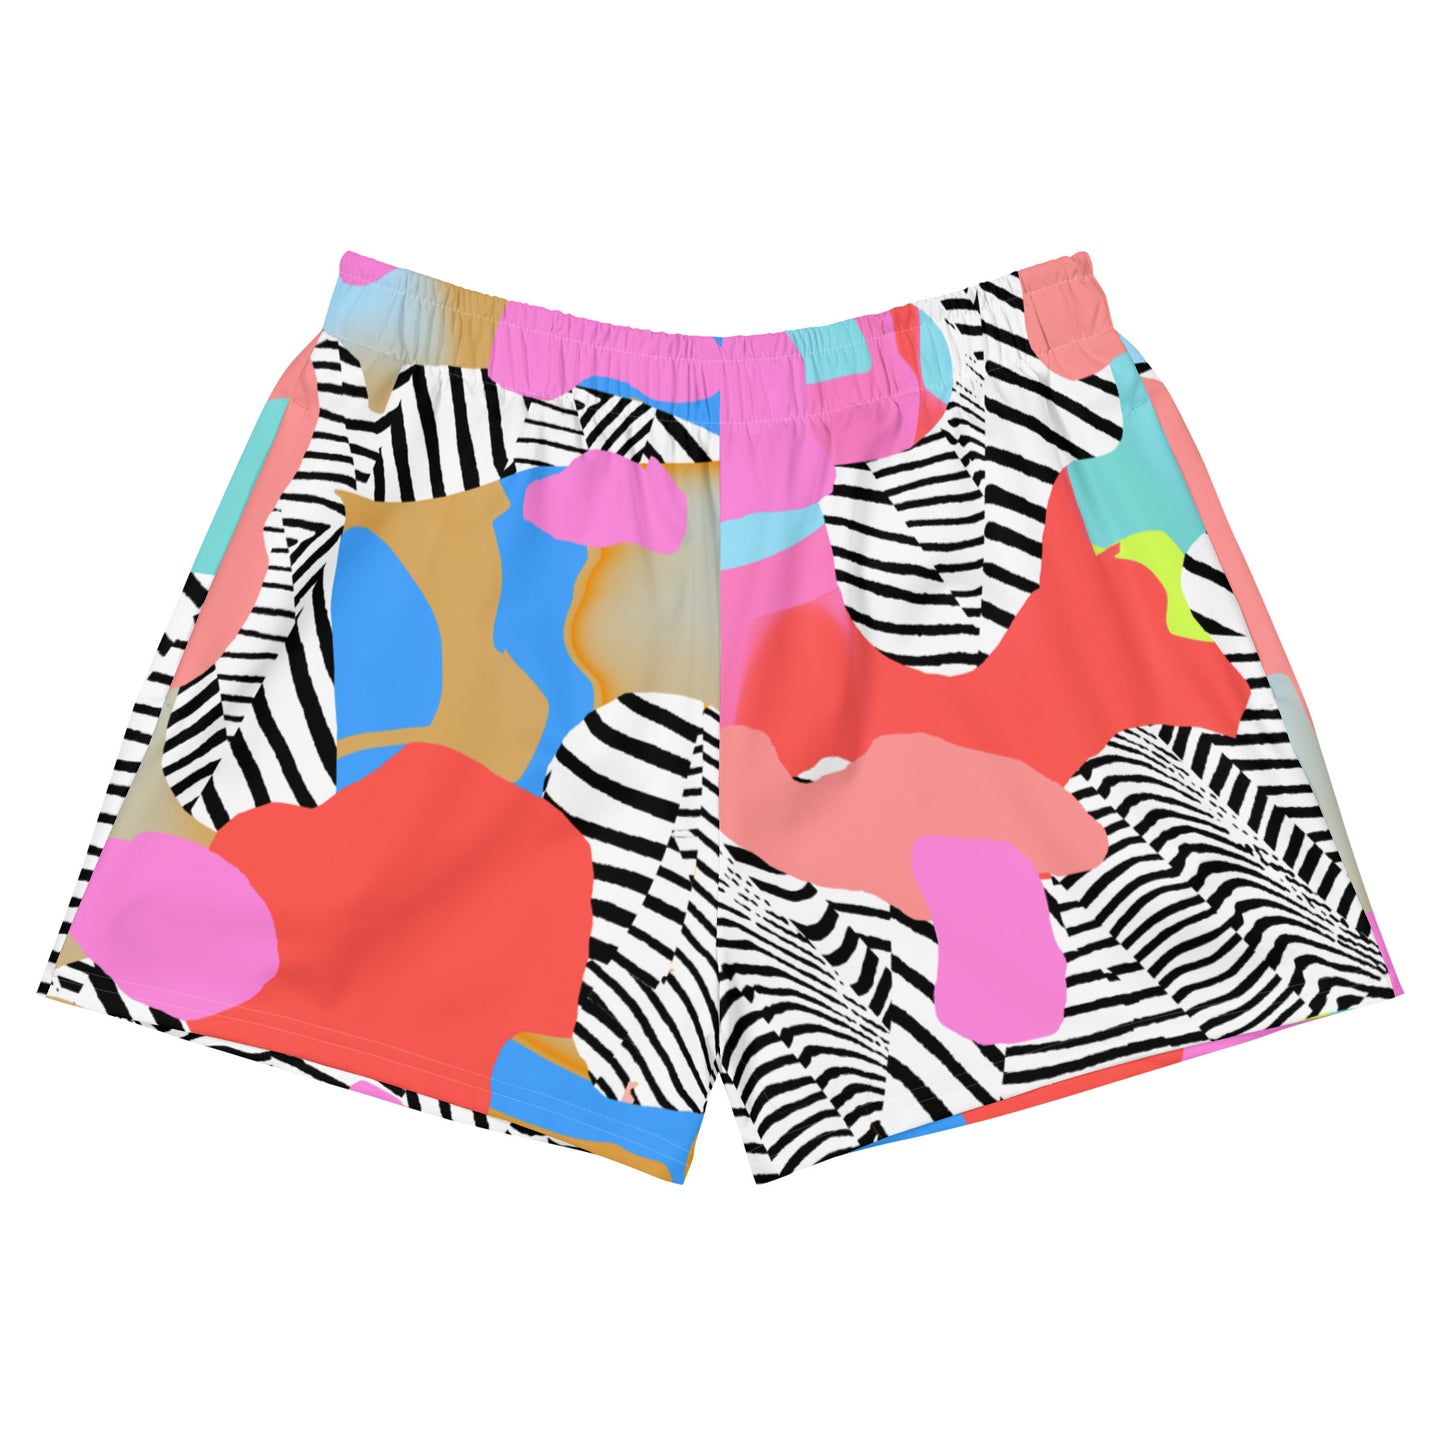 Chaos Women’s Recycled Athletic Shorts